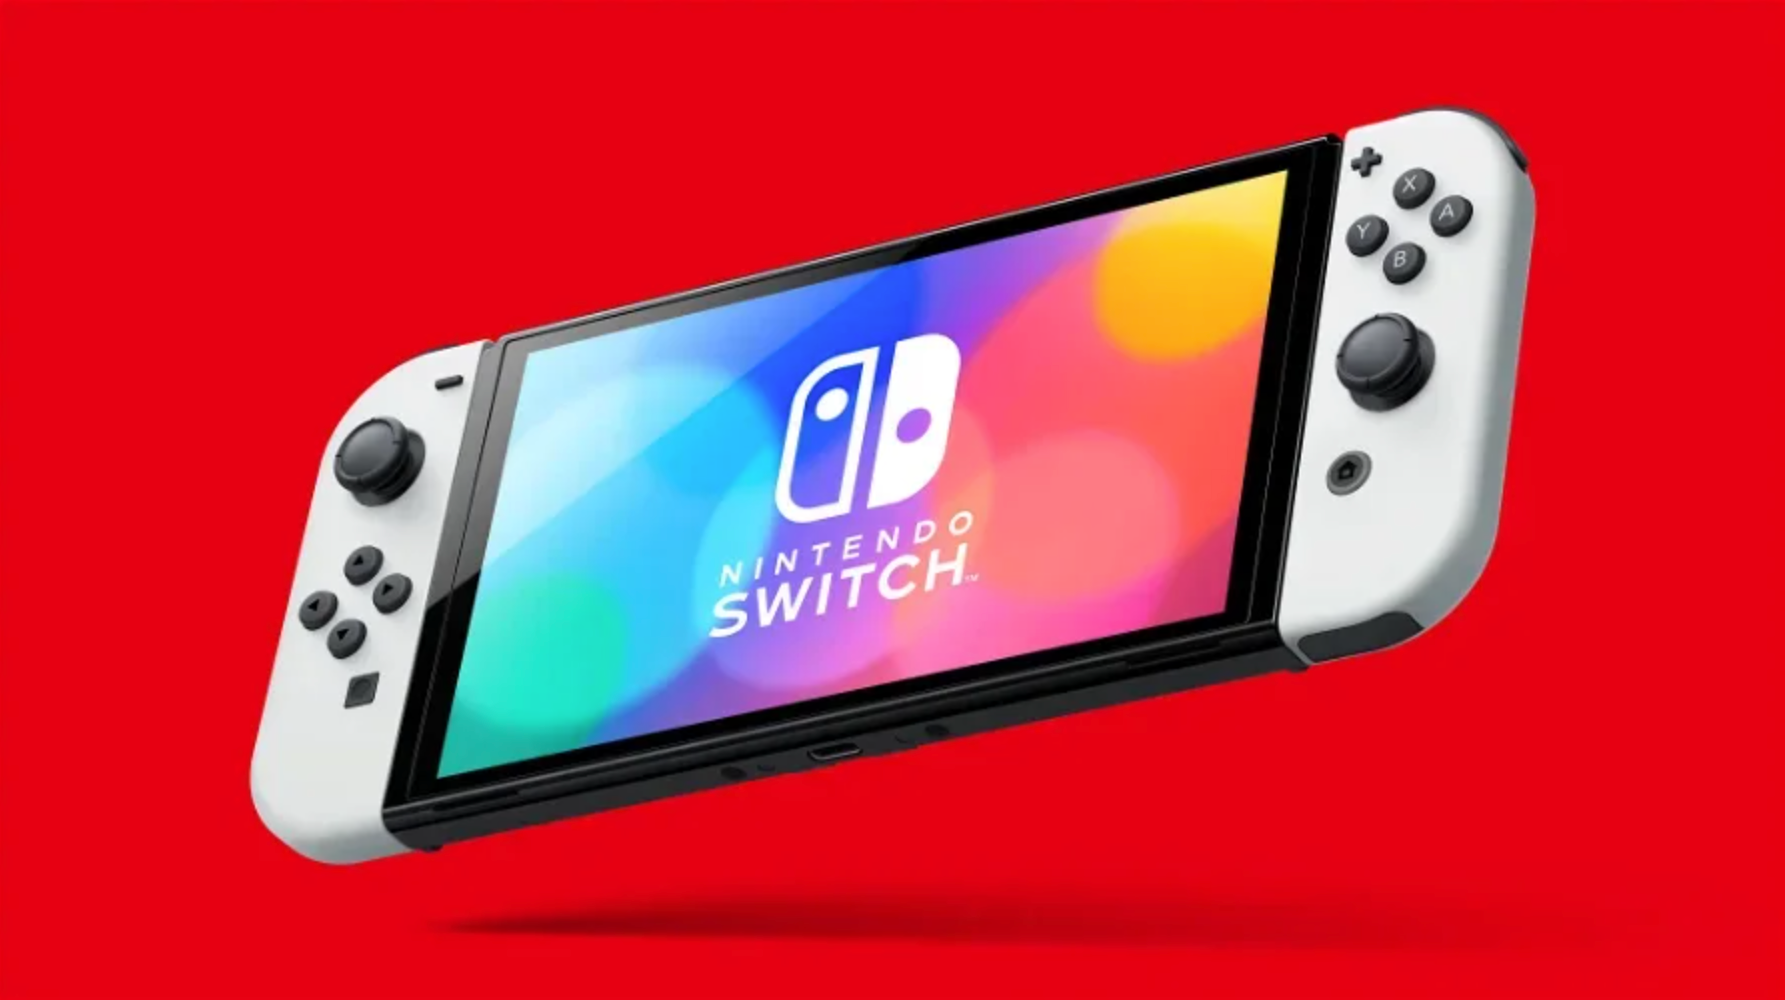 The 5 best Nintendo Switch games you can play right now - CBS News